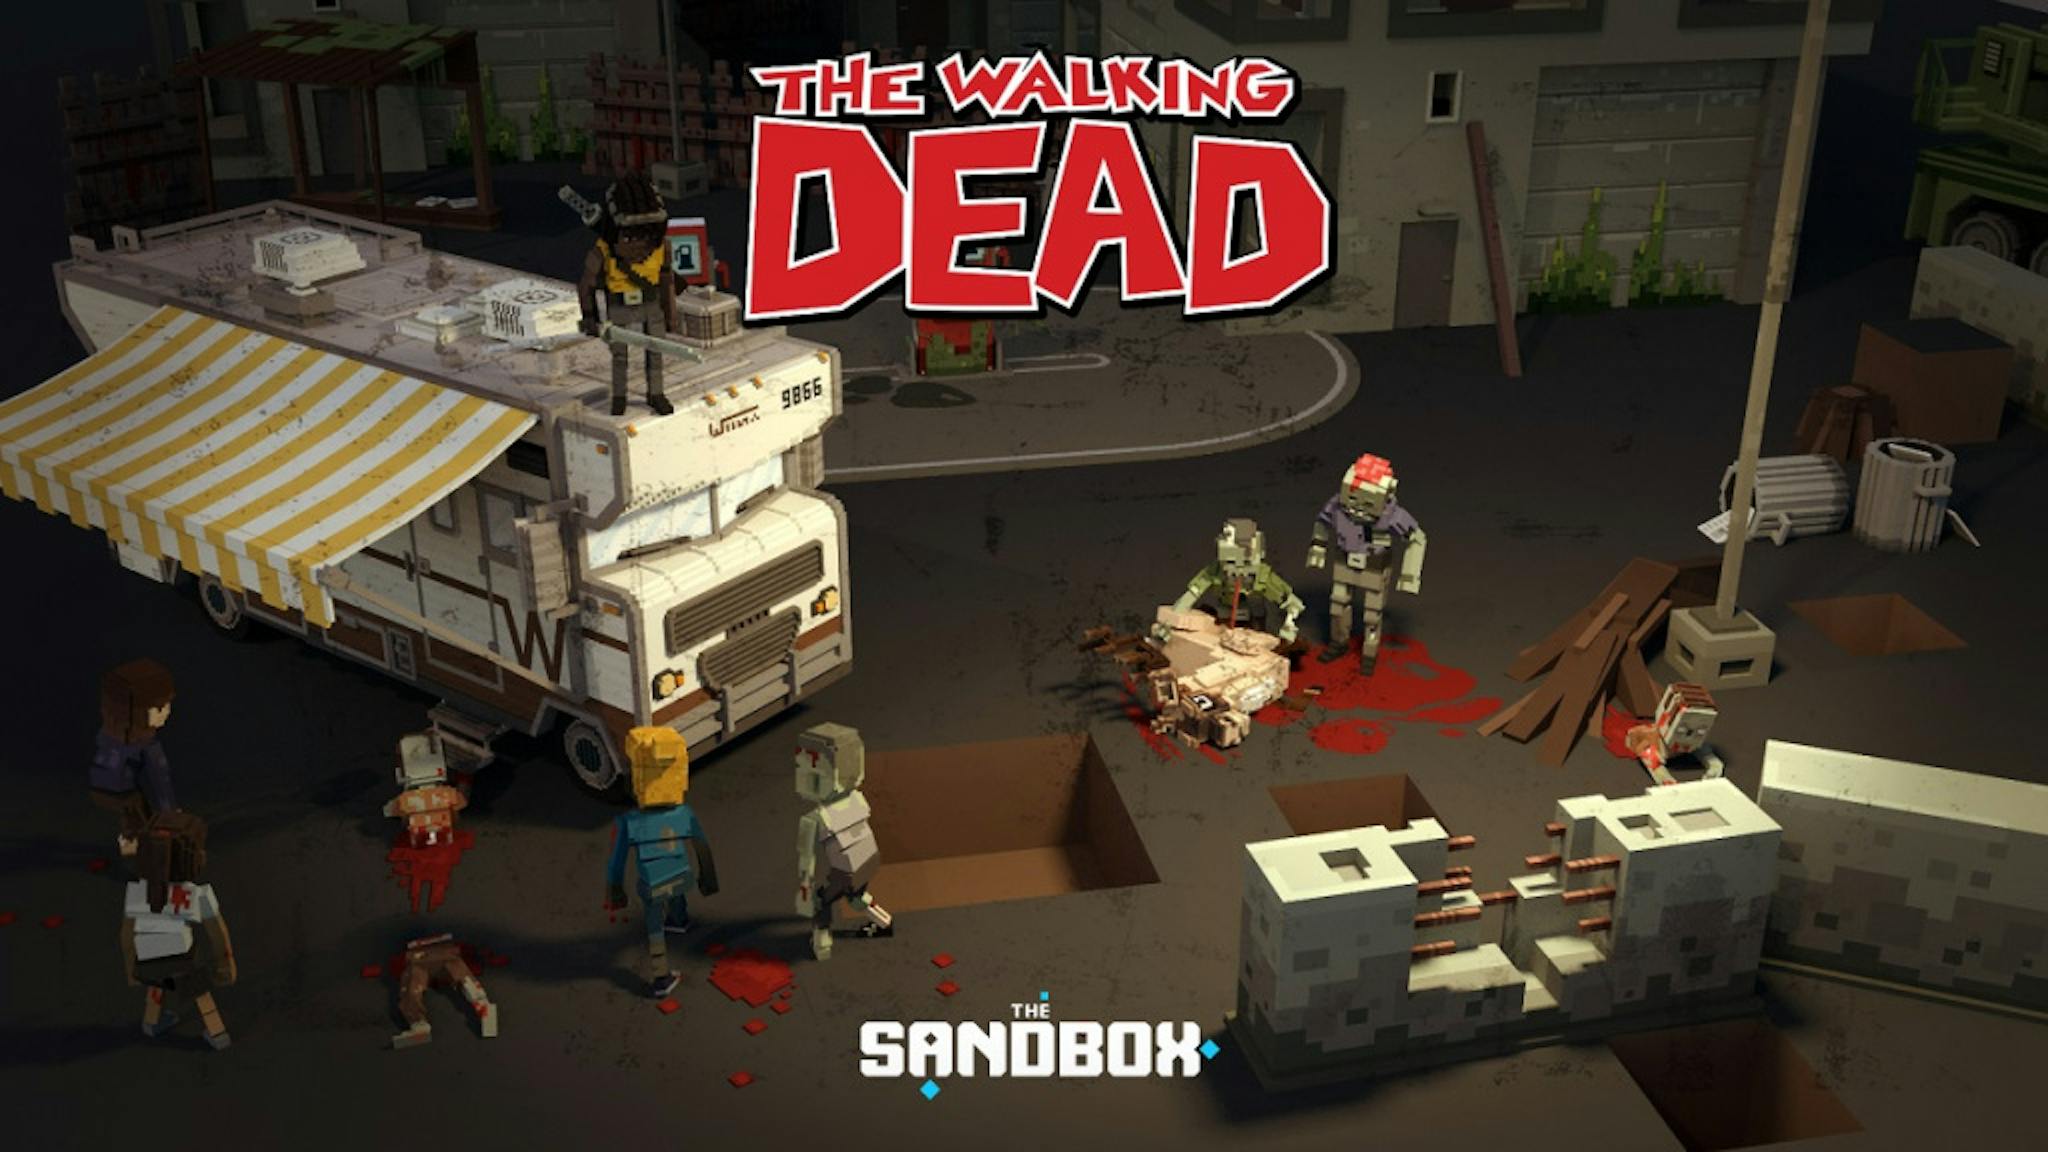 The Walking Dead experience will be available to players soon | Image credit: The Sandbox